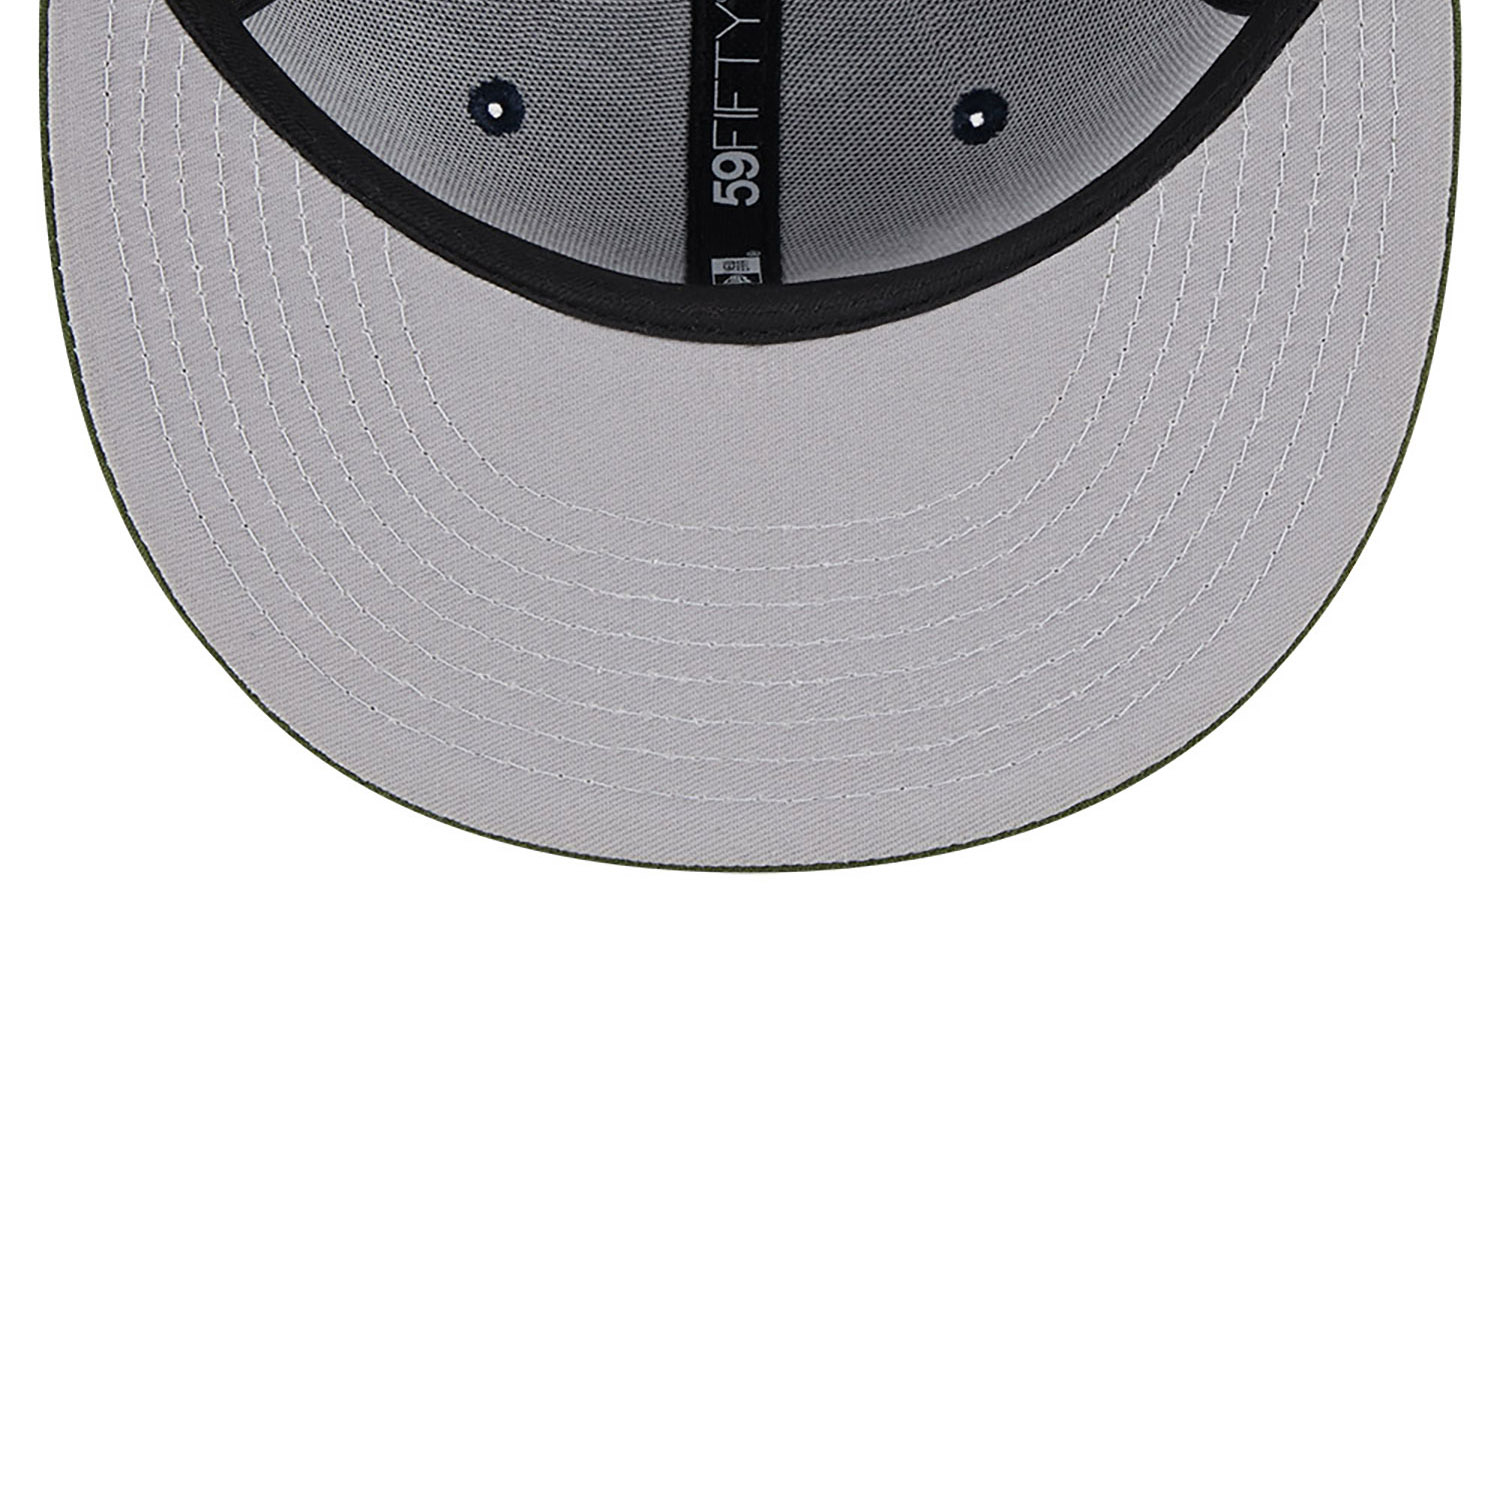 New York Yankees Sprouted Navy 59FIFTY Fitted Cap